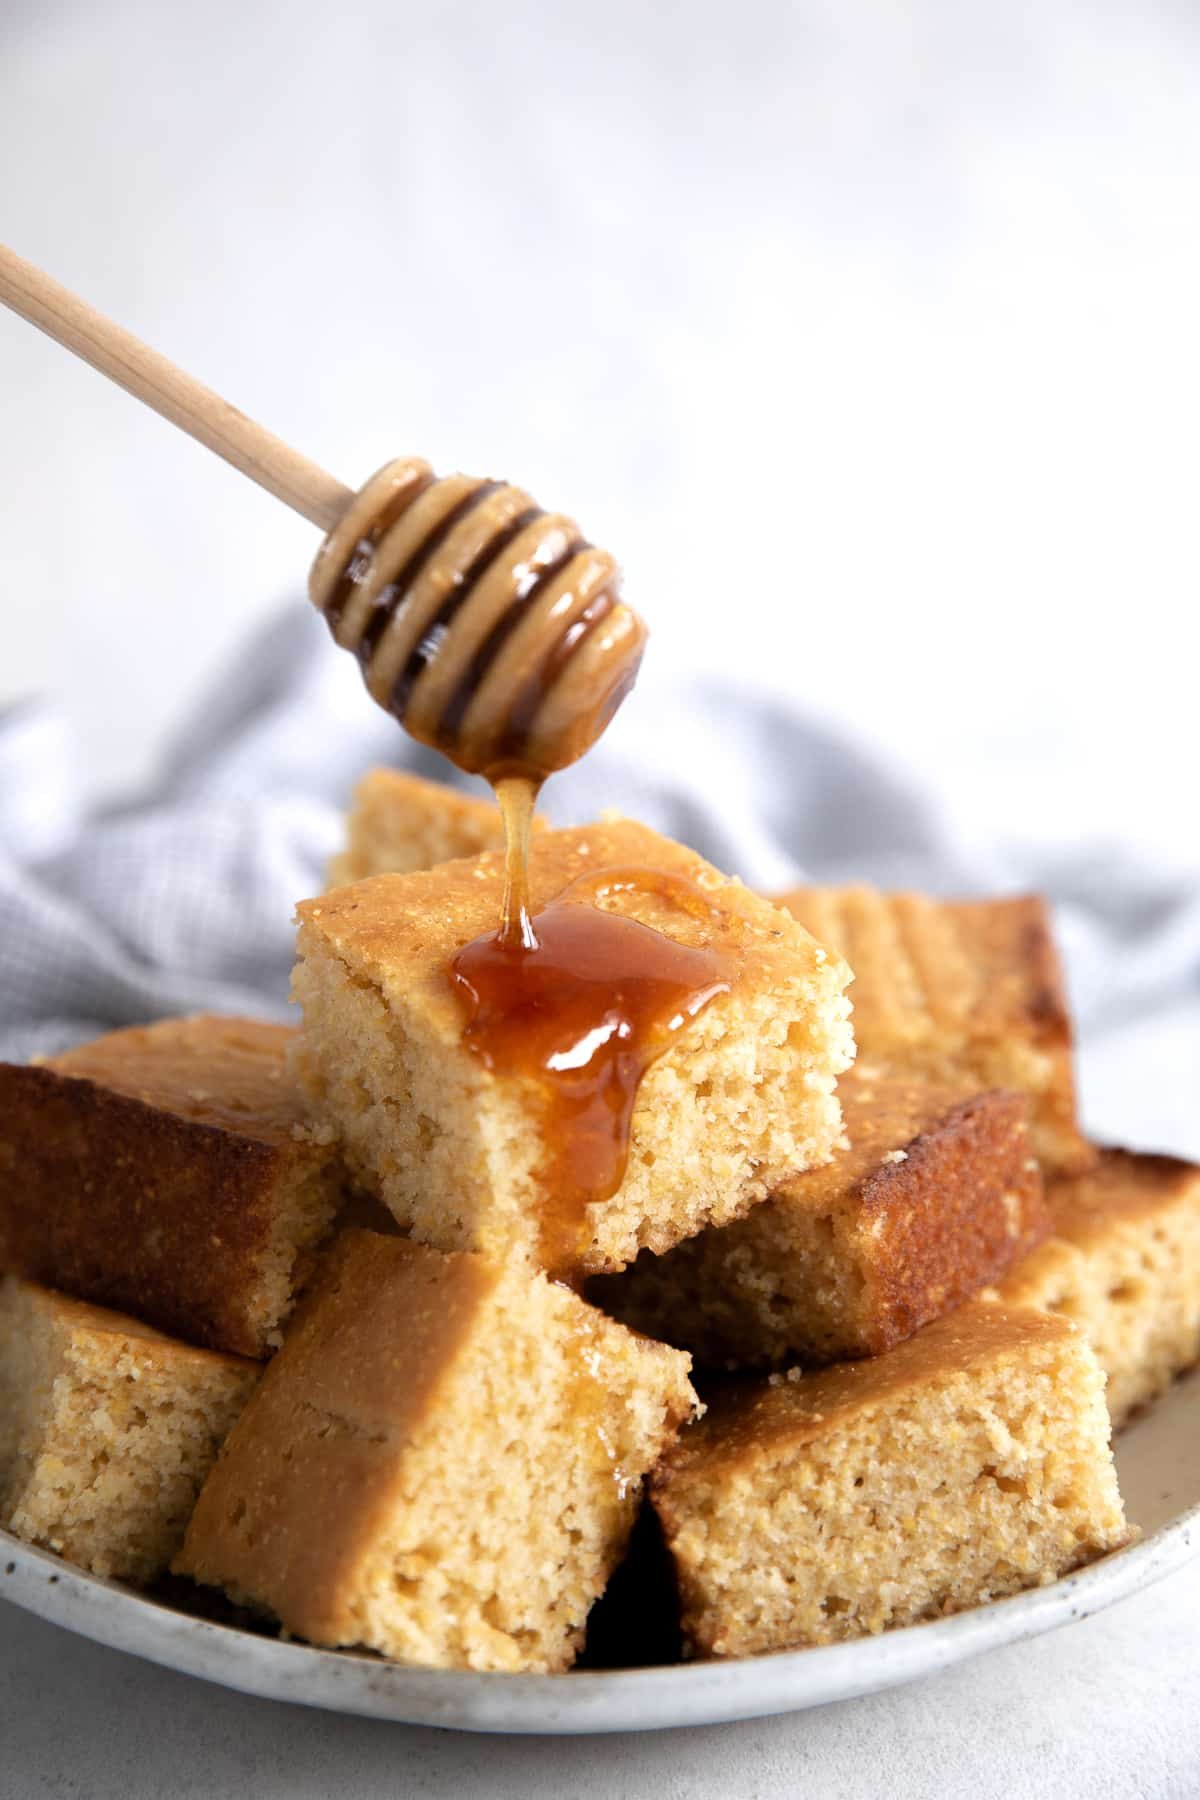 Honey being drizzled over freshly baked cornbread.